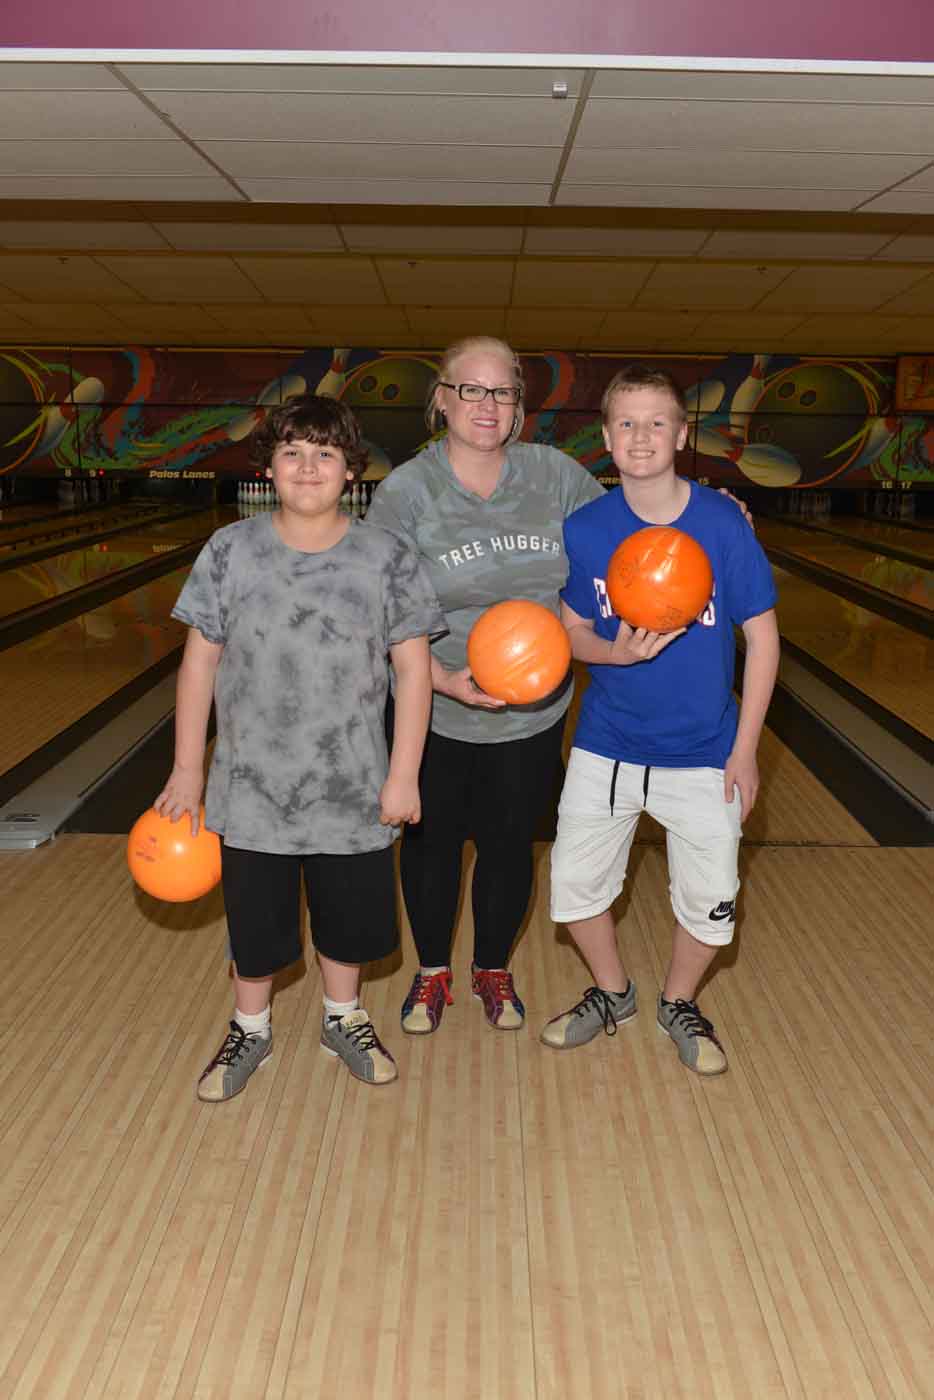 Mother and 2 sons posing at bowling alley